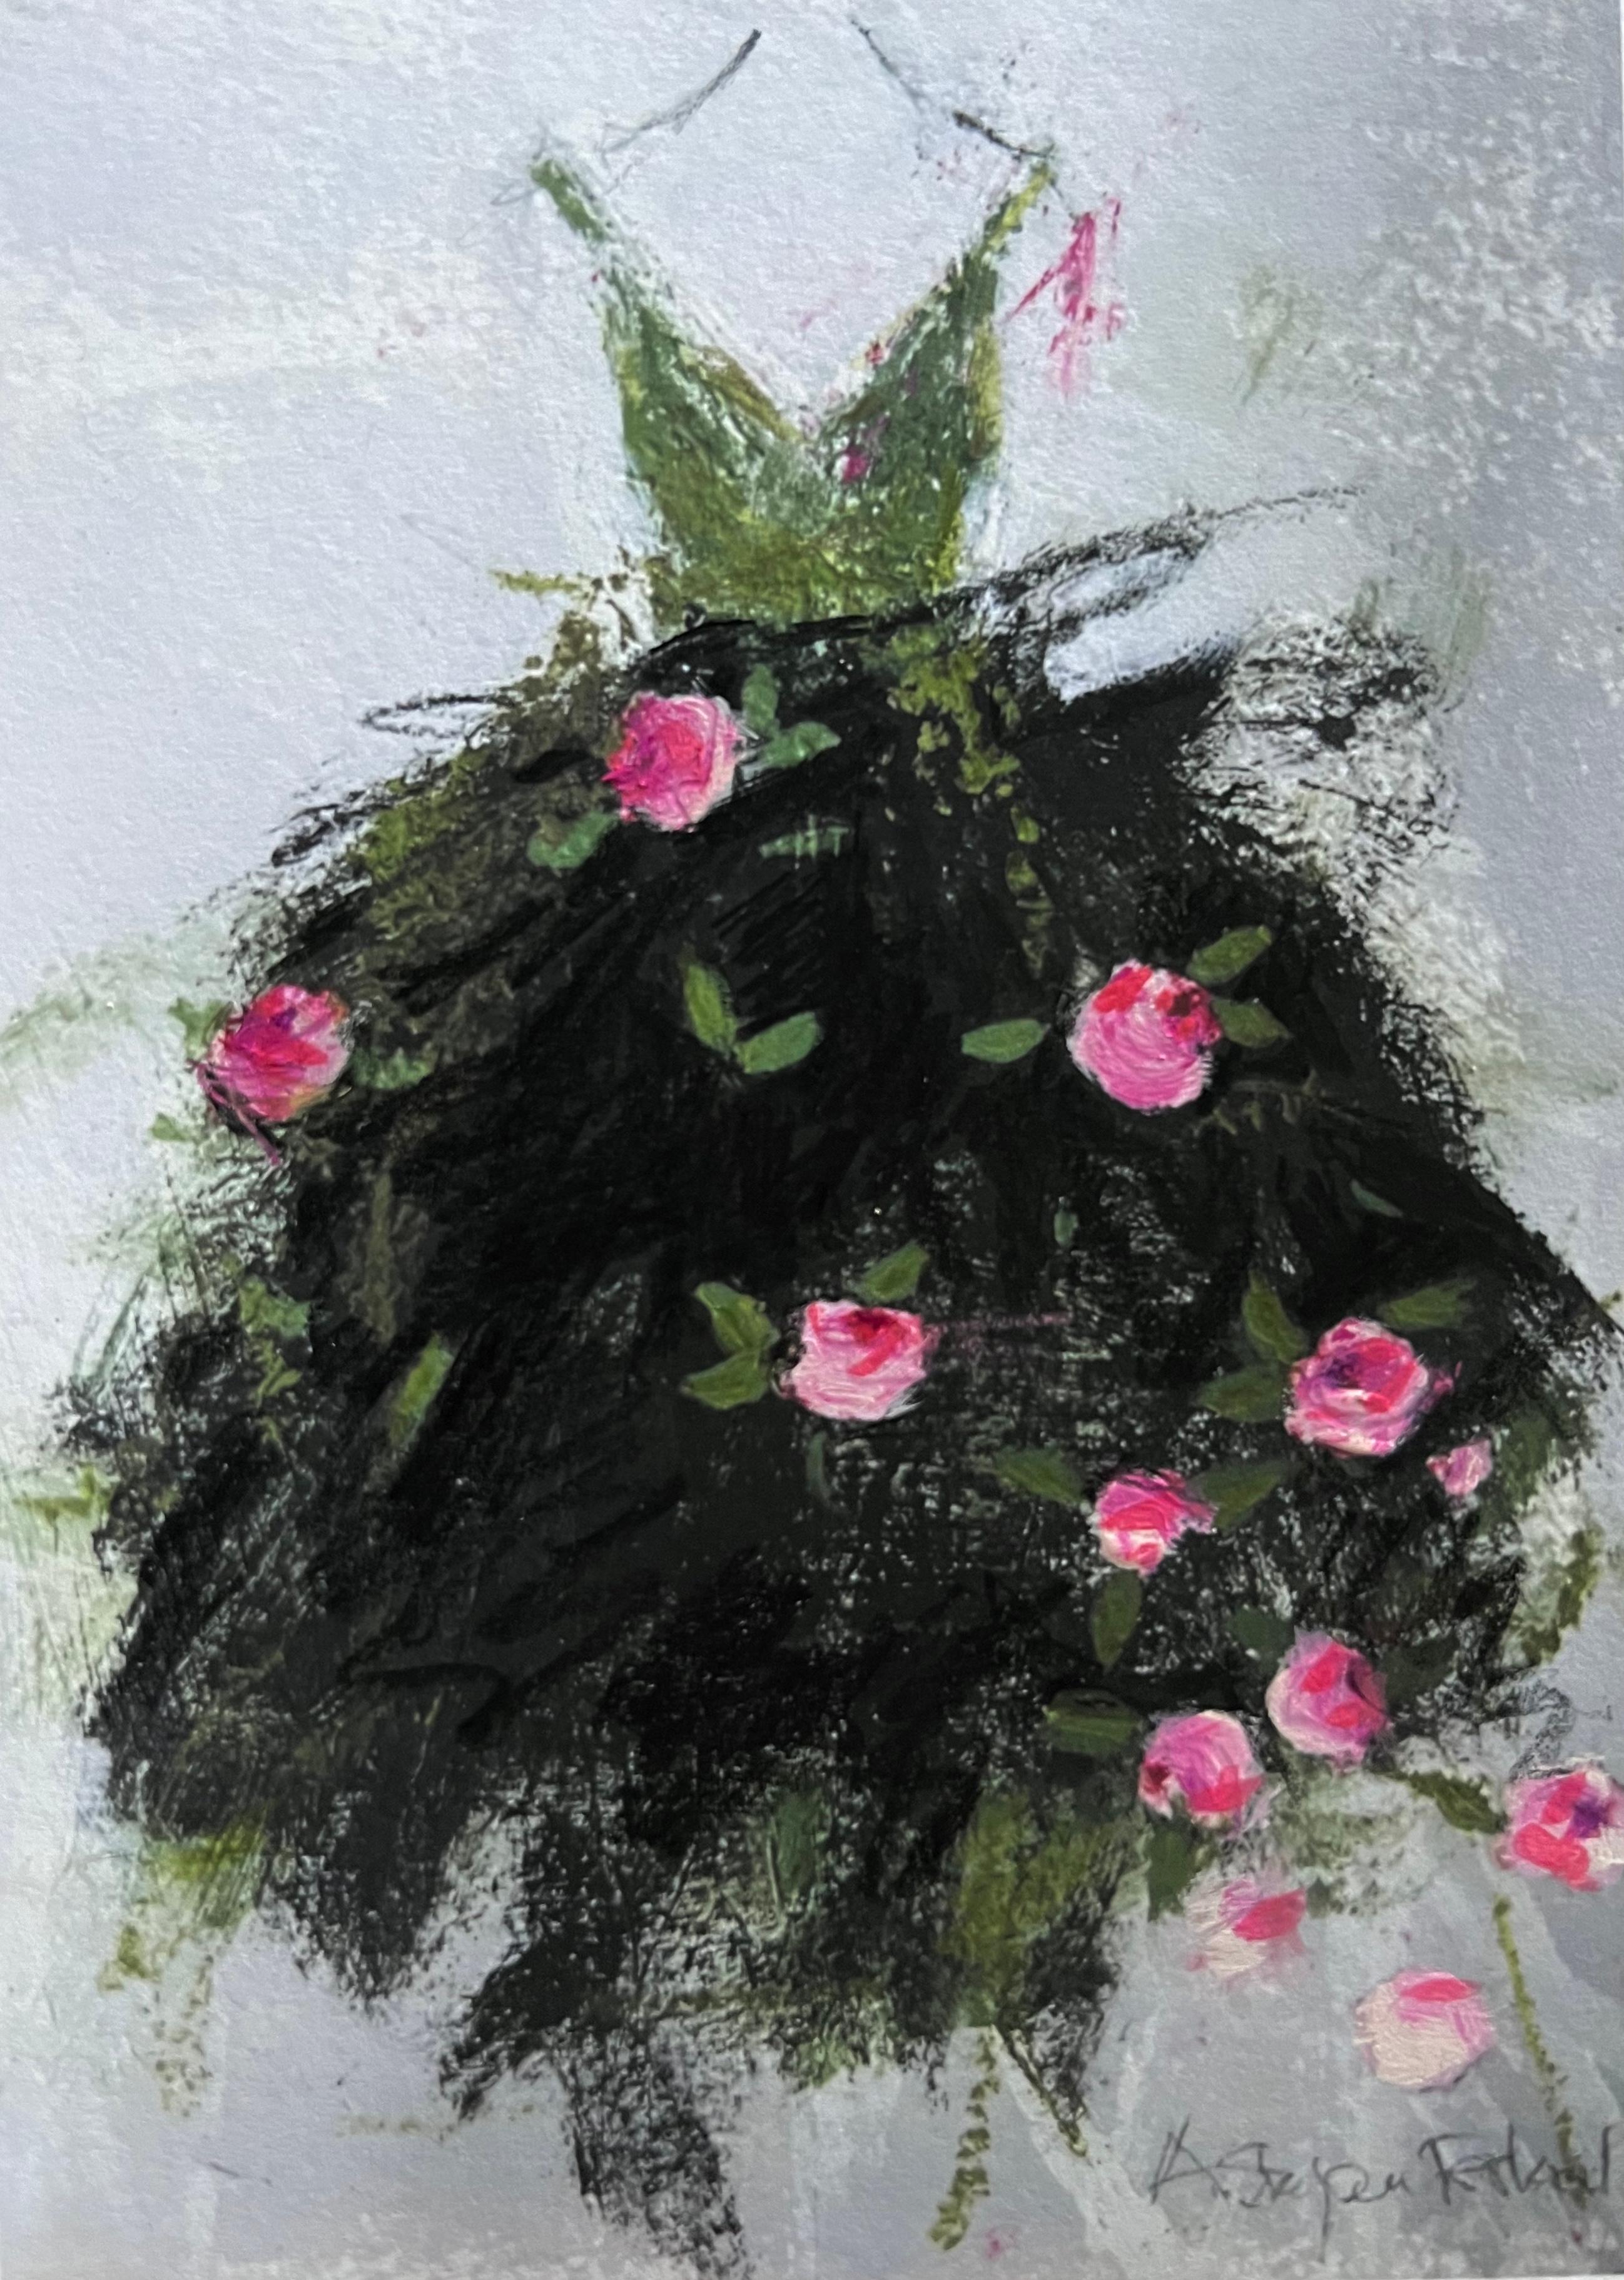 A delicate dance of pink, green and black. This limited edition Giclée print is a high-quality reproduction of an original artwork printed on archival paper. Hand painted strokes and embellishments are added to give a unique quality to the print.